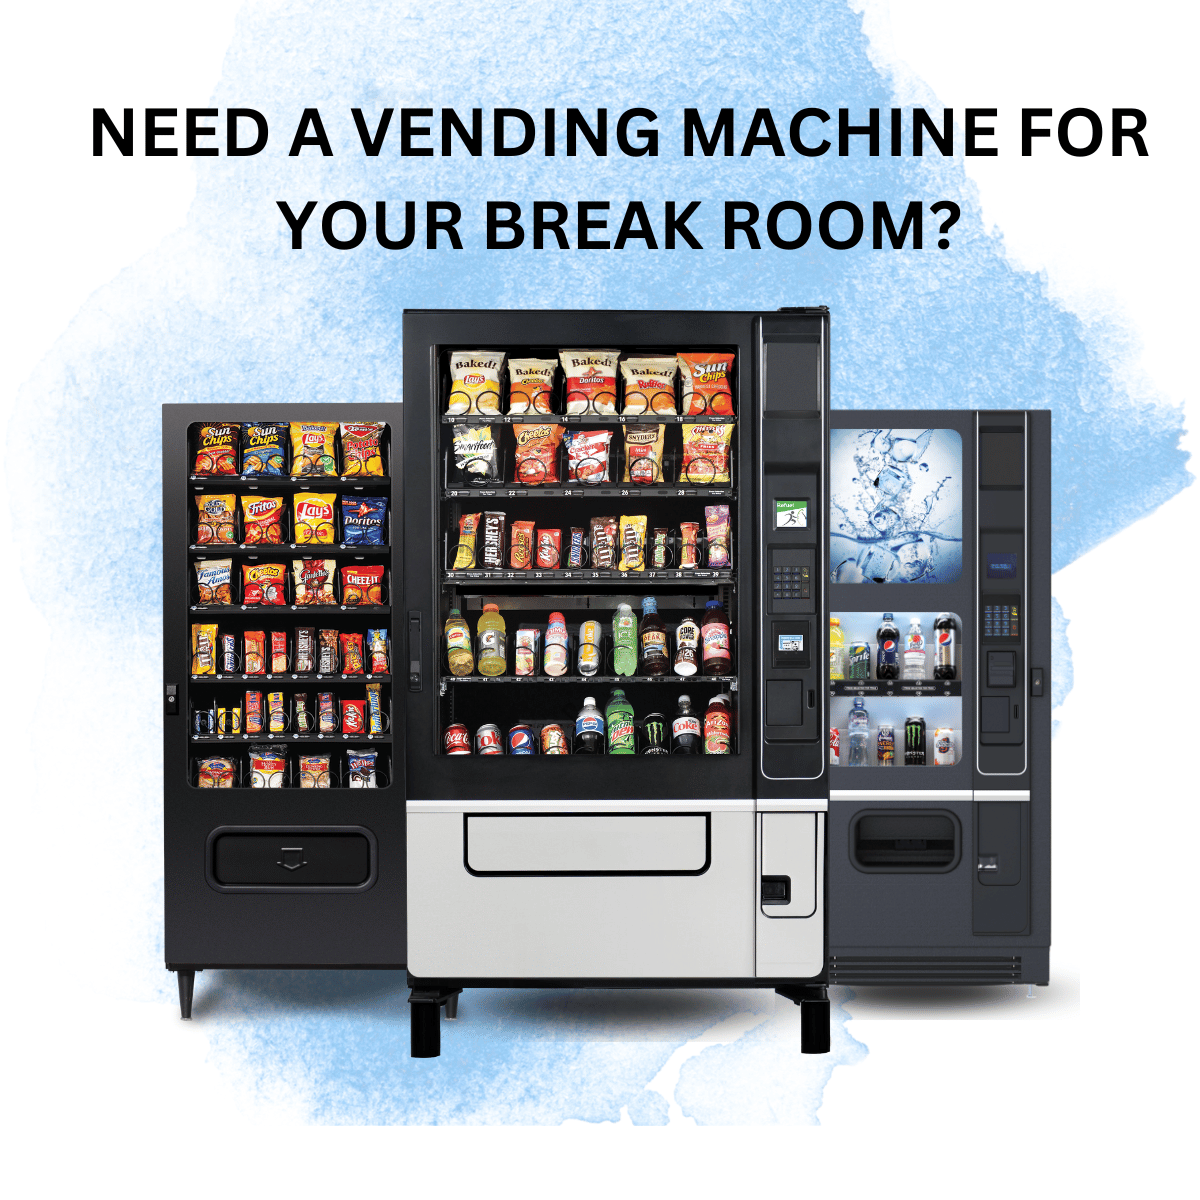 DO YOU NEED A VENDING MACHINE FOR YOUR BREAK ROOM?